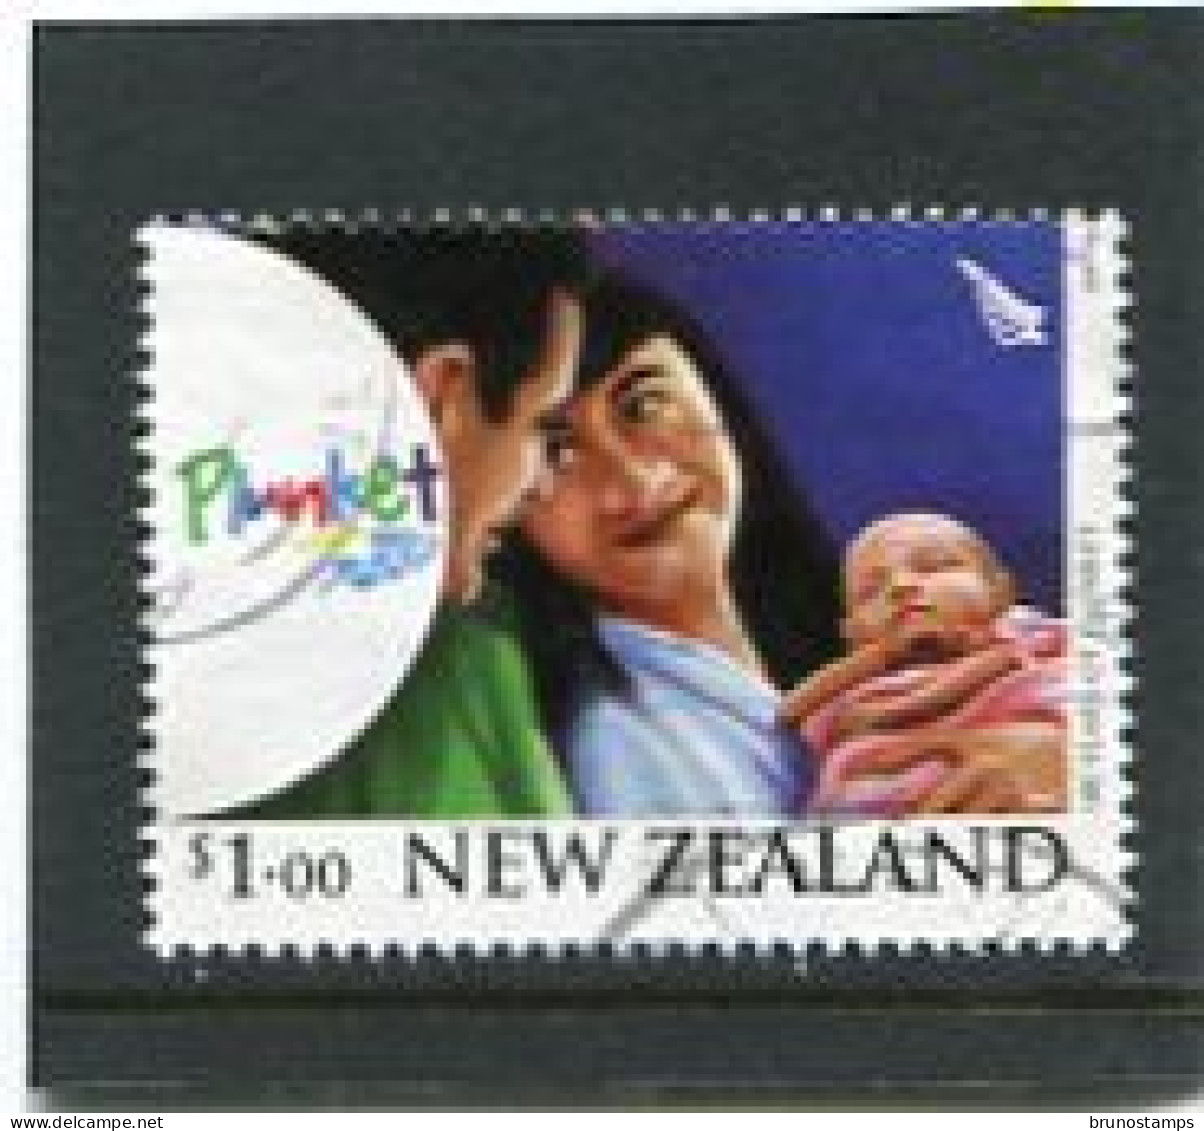 NEW ZEALAND - 2007  1$  RUGBY  FINE  USED - Used Stamps